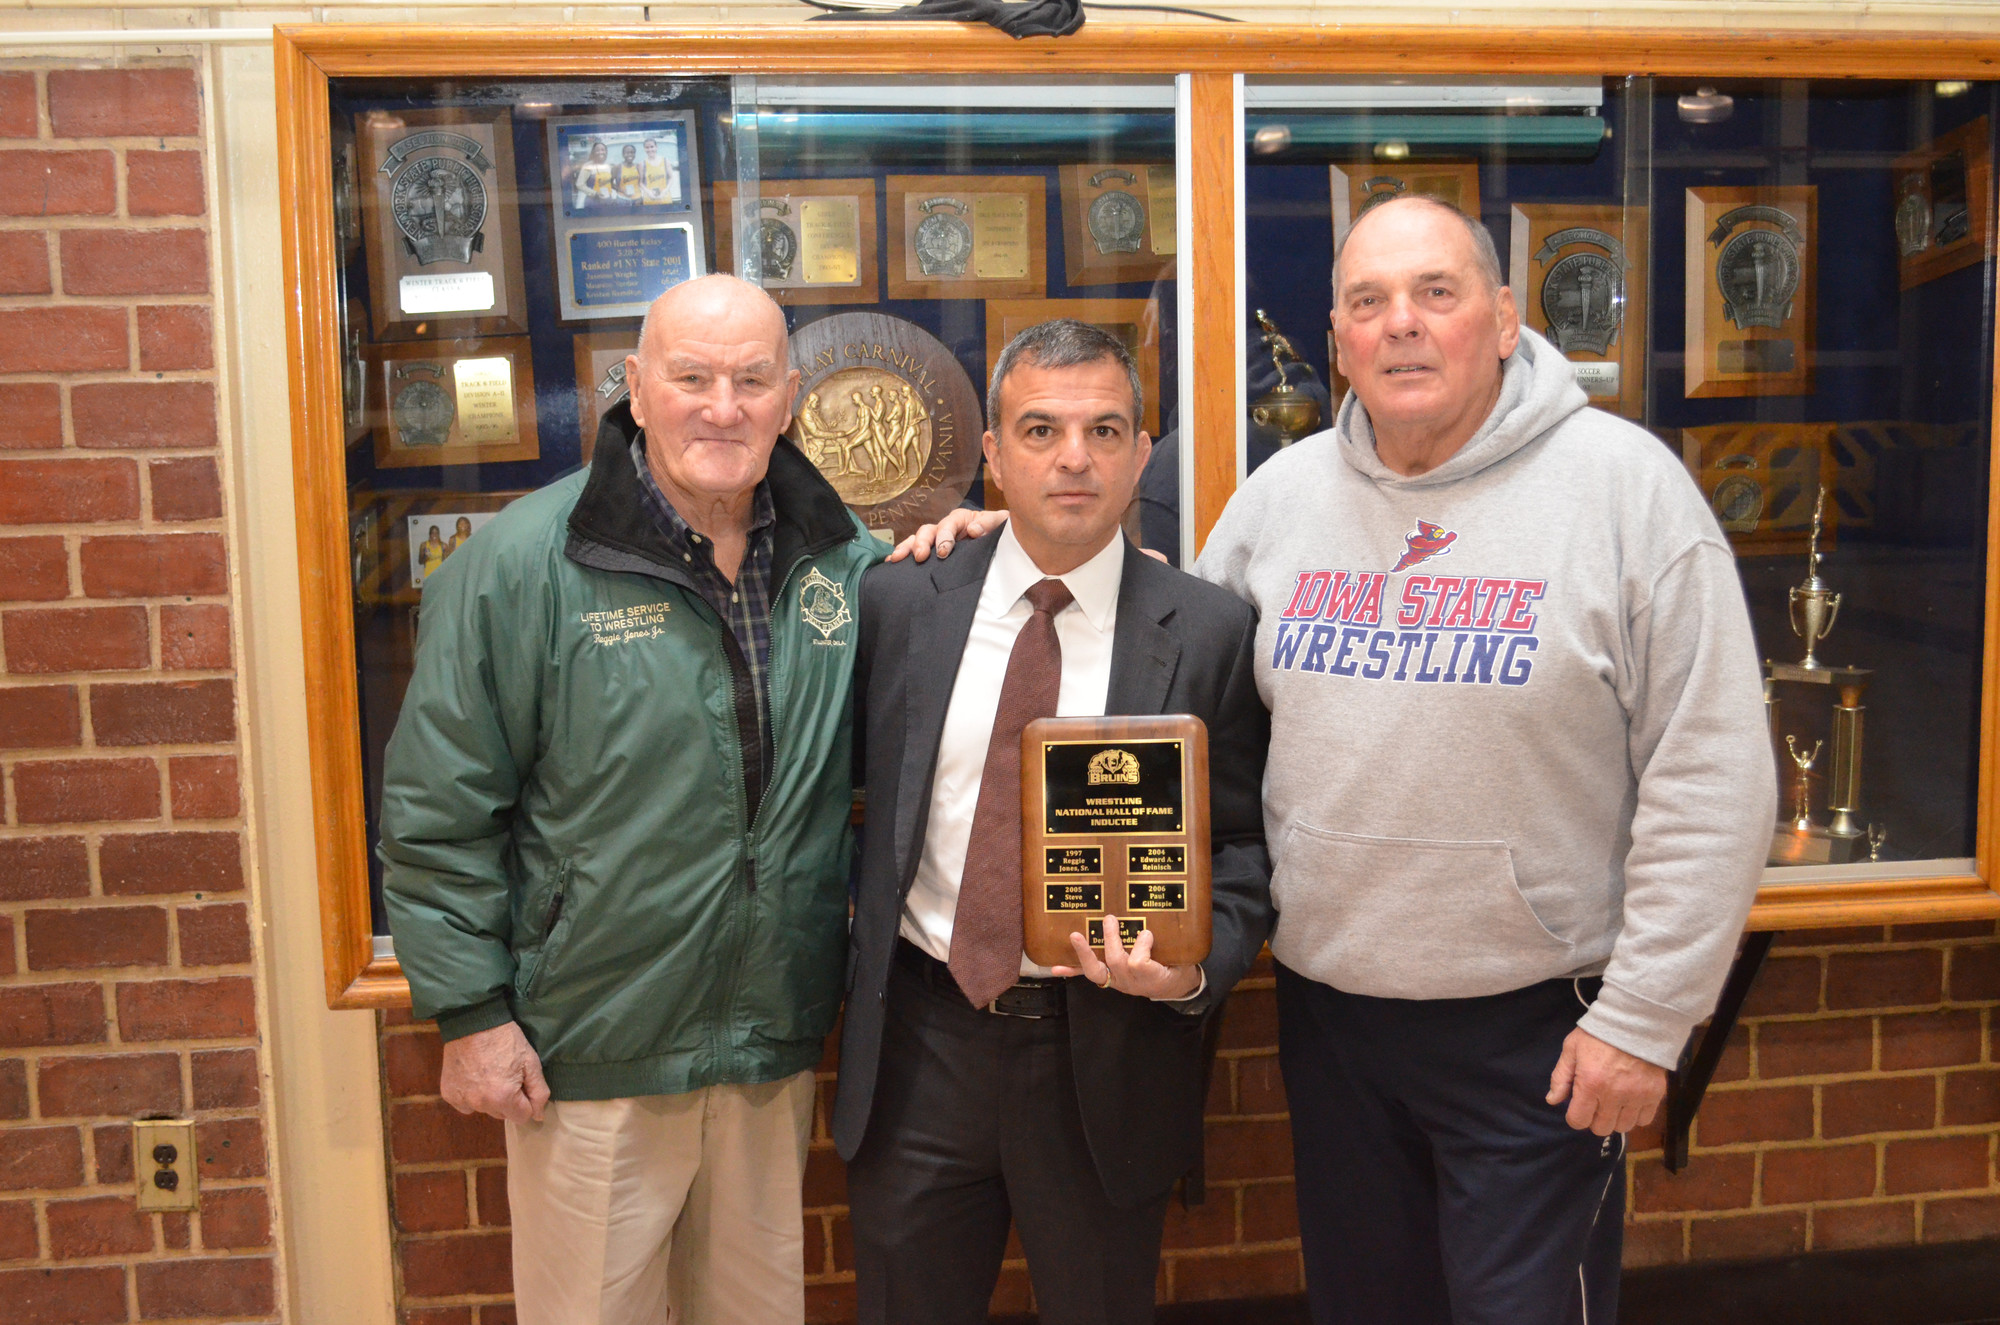 Former Baldwin Wrestling coaches and athletes were recognized before a match last week.